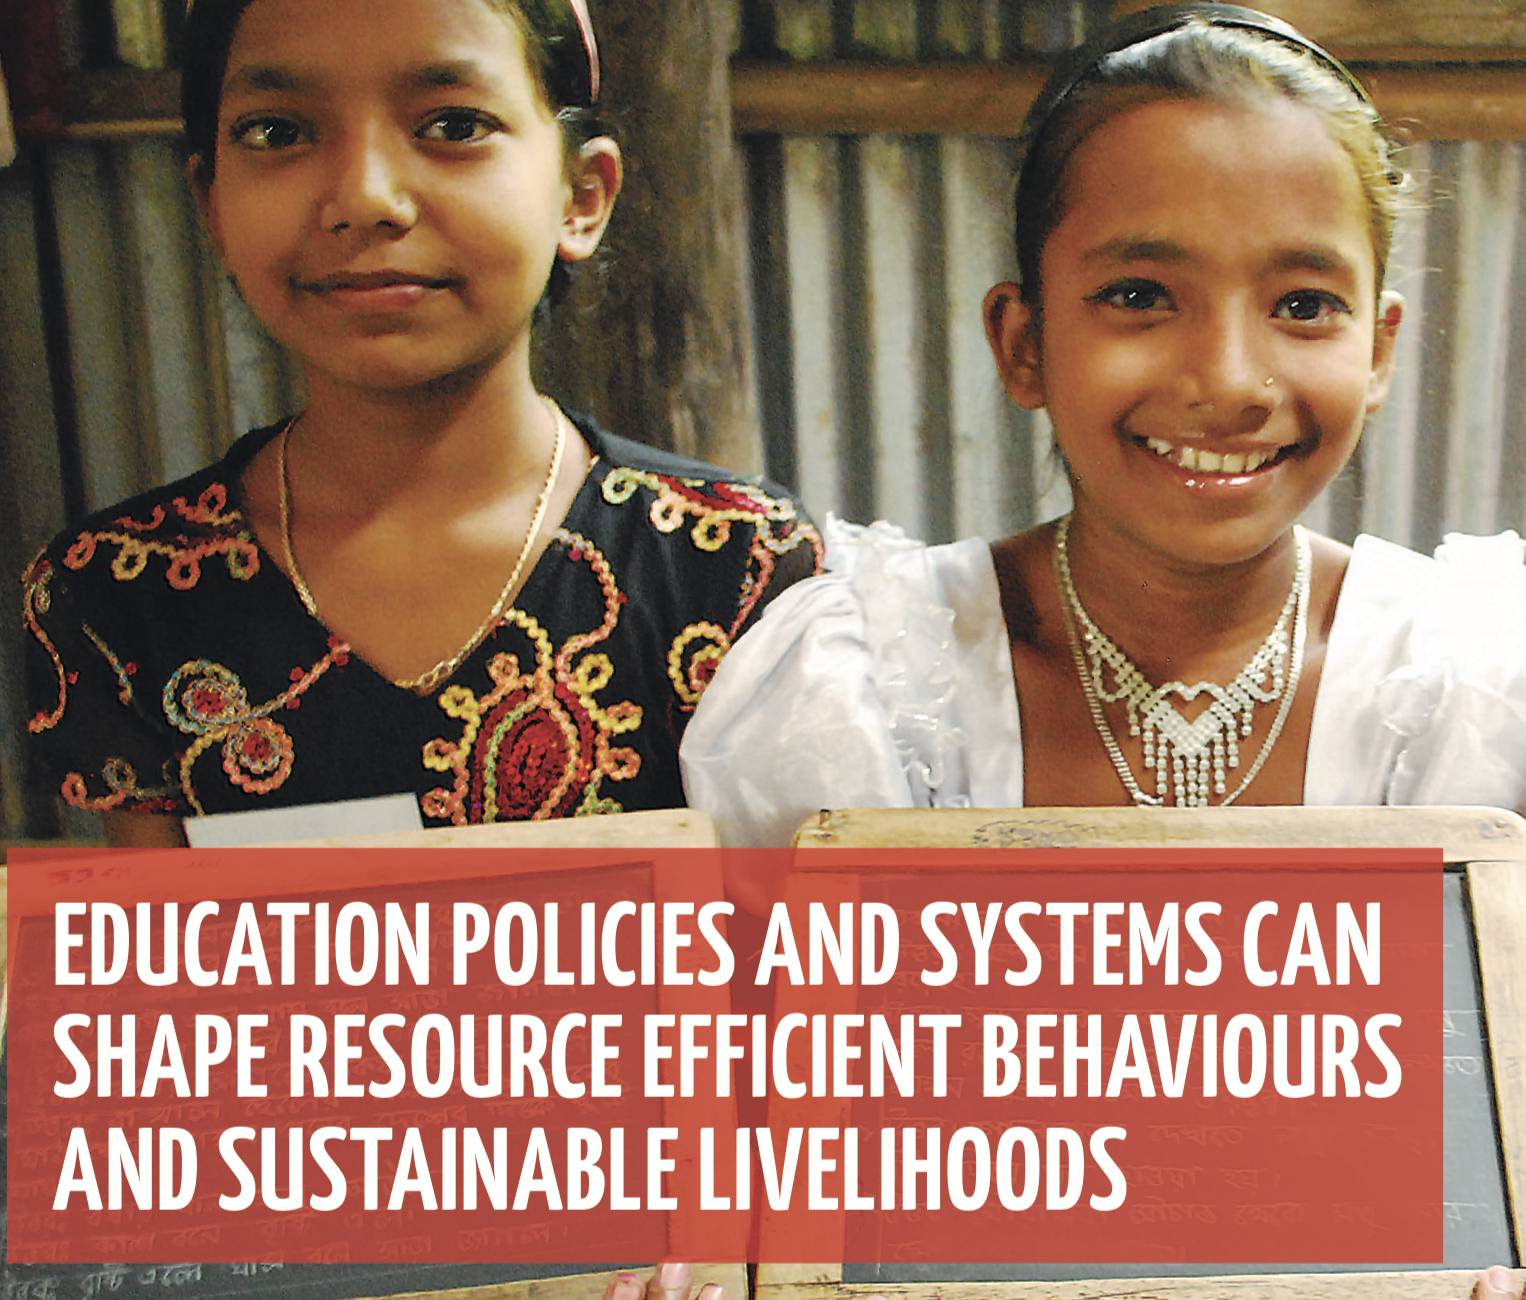 Education policies and systems can shape resource efficient behaviours and sustainable livelihoods